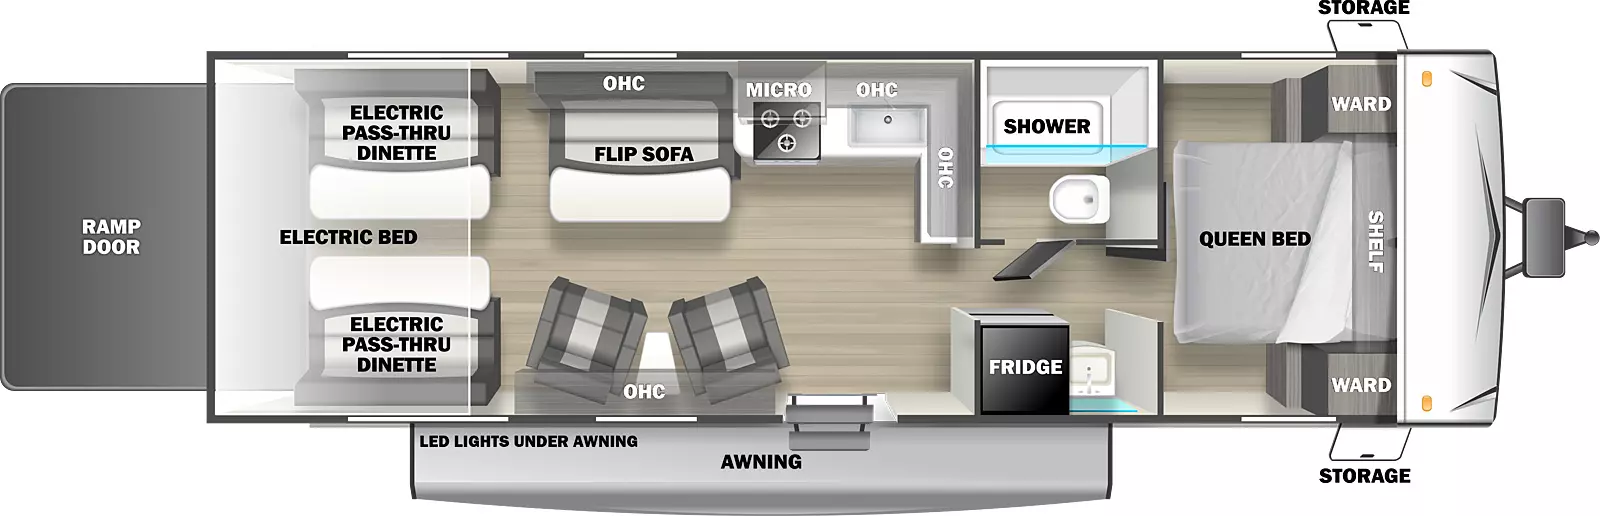 The Shockwave 25RQMX is a toy hauler trailer with one entry door, a rear ramp door, front storage, and 16' awning on the exterior. Inside, a walkaround RV queen bed is located in the front of the unit, with wardrobe cabinets on either side and a shelf overhead. Just outside the bedroom door is a sink on the door side with the refrigerator next to it. Across from the sink and refrigerator is the bathroom with tub shower and commode. In the main living area, the kitchen is located on the off-door side with an L-shaped countertop, sink, cooktop and oven, with cabinets and microwave mounted overhead. Additional overhead cabinets are mounted on the off-door side, with a pair of upholstered chairs and small table located underneath. Across from the chairs on the off-door side is a flip sofa and half dinette table. In the rear of the unit are two flip sofa benches, one on either side, with a split dinette table between them. These convert to a standard electric bed. This trailer provides 14' 4" of interior cargo space.